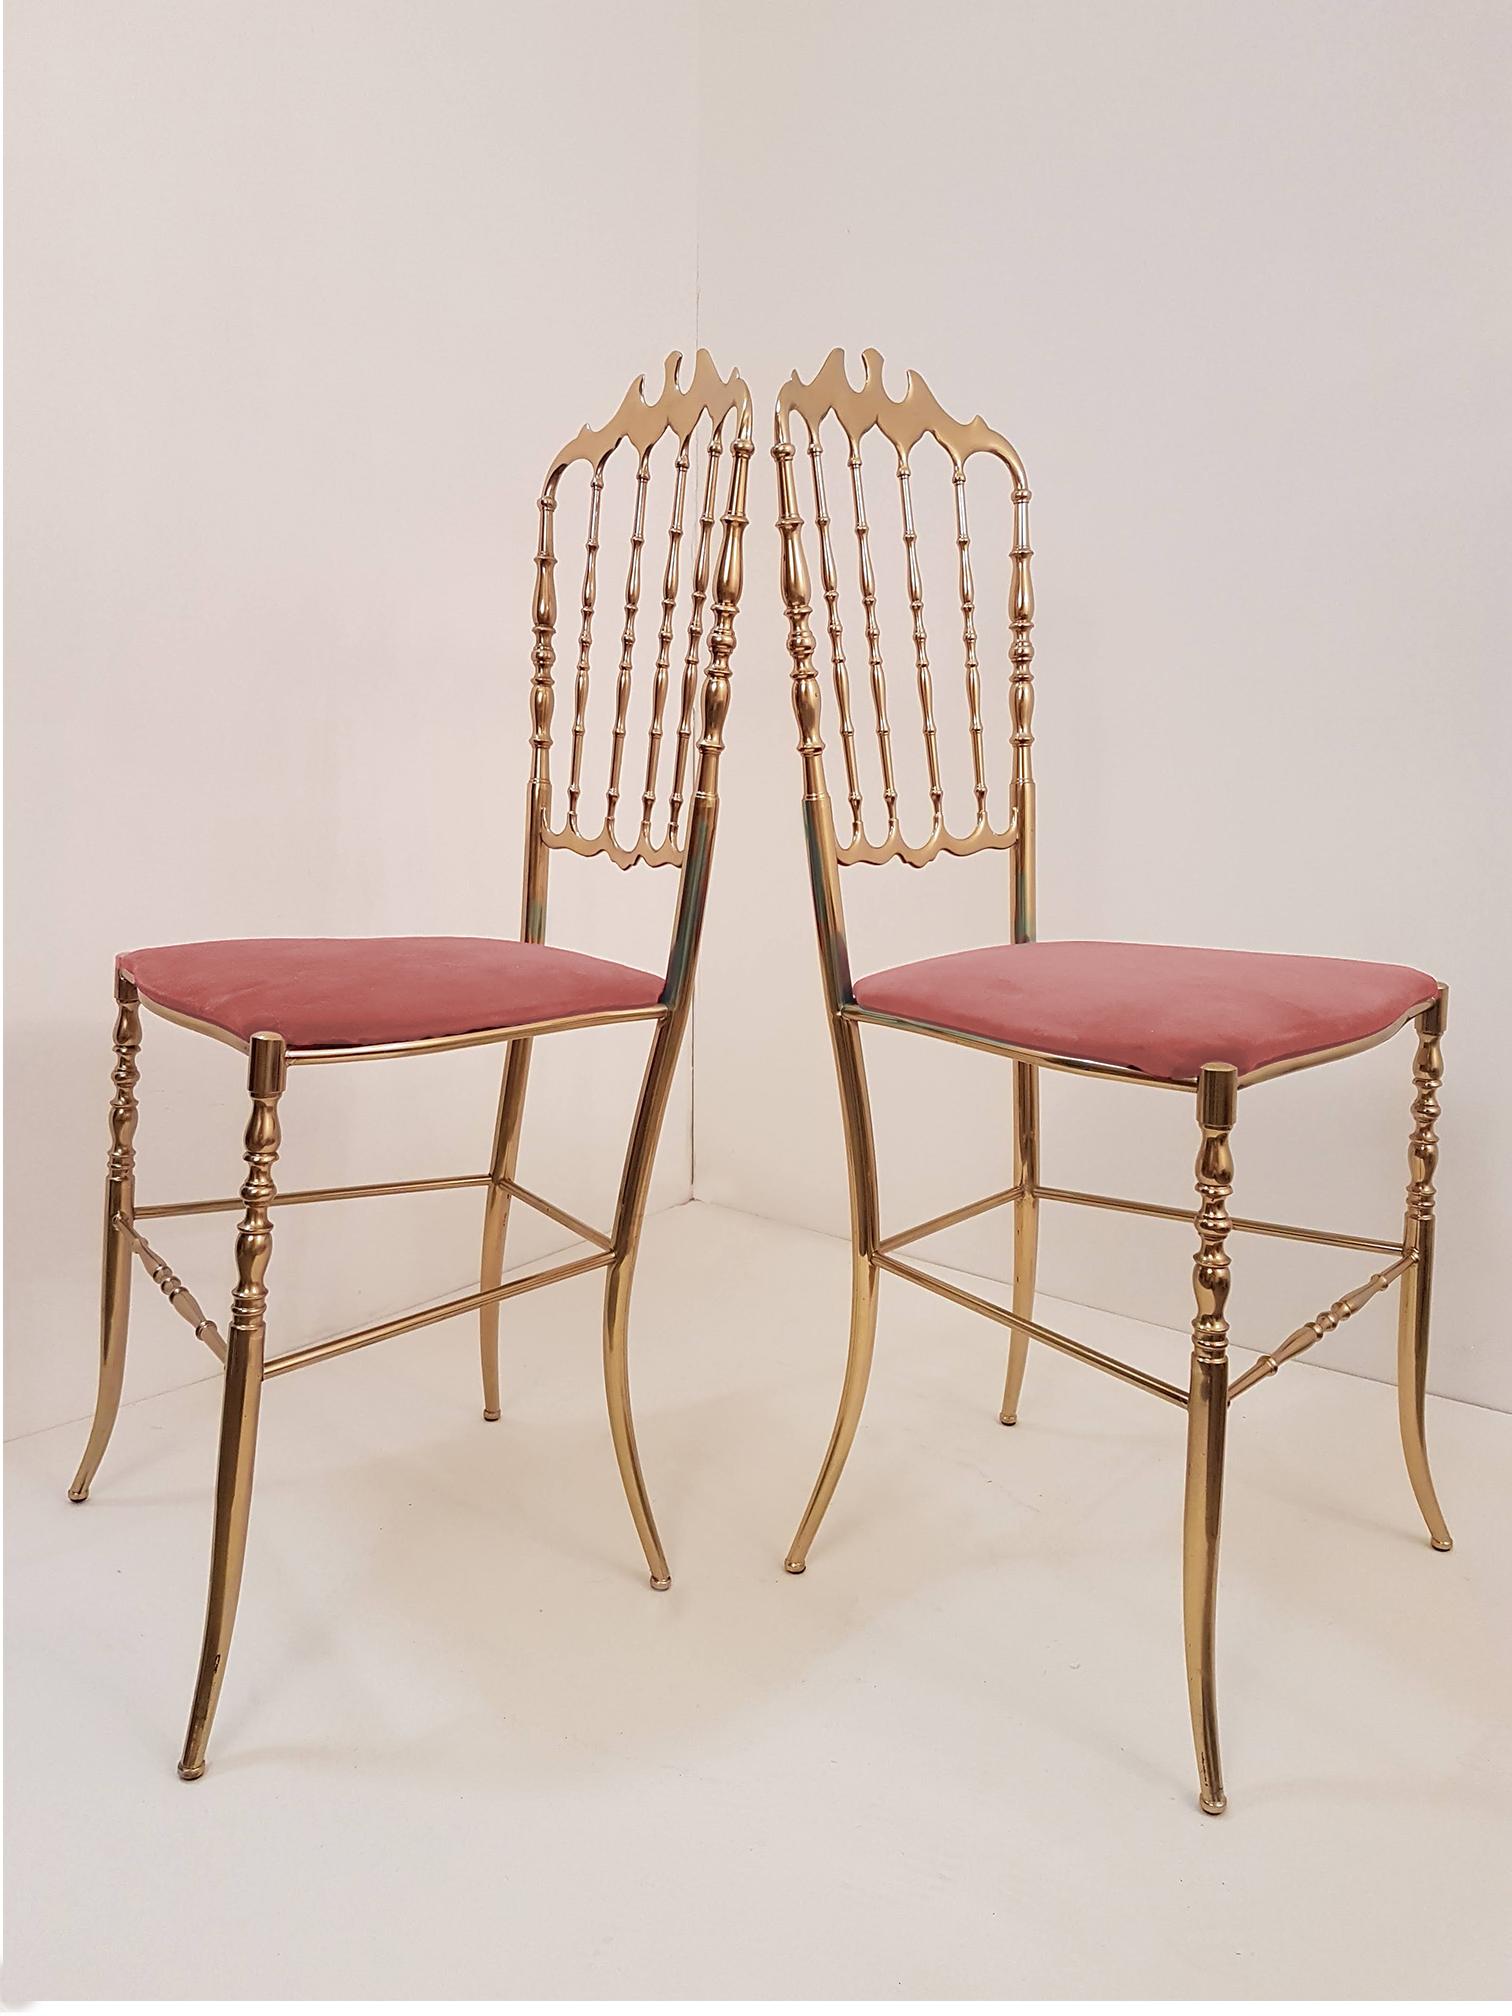 Pair of refined Italian Campanino Classic Chiavari chairs, circa 1950s. Massive brass with upholstered with pink velvet.

In very good condition. We are able, to reupholster these chairs in any type of fabric. The professional and experienced